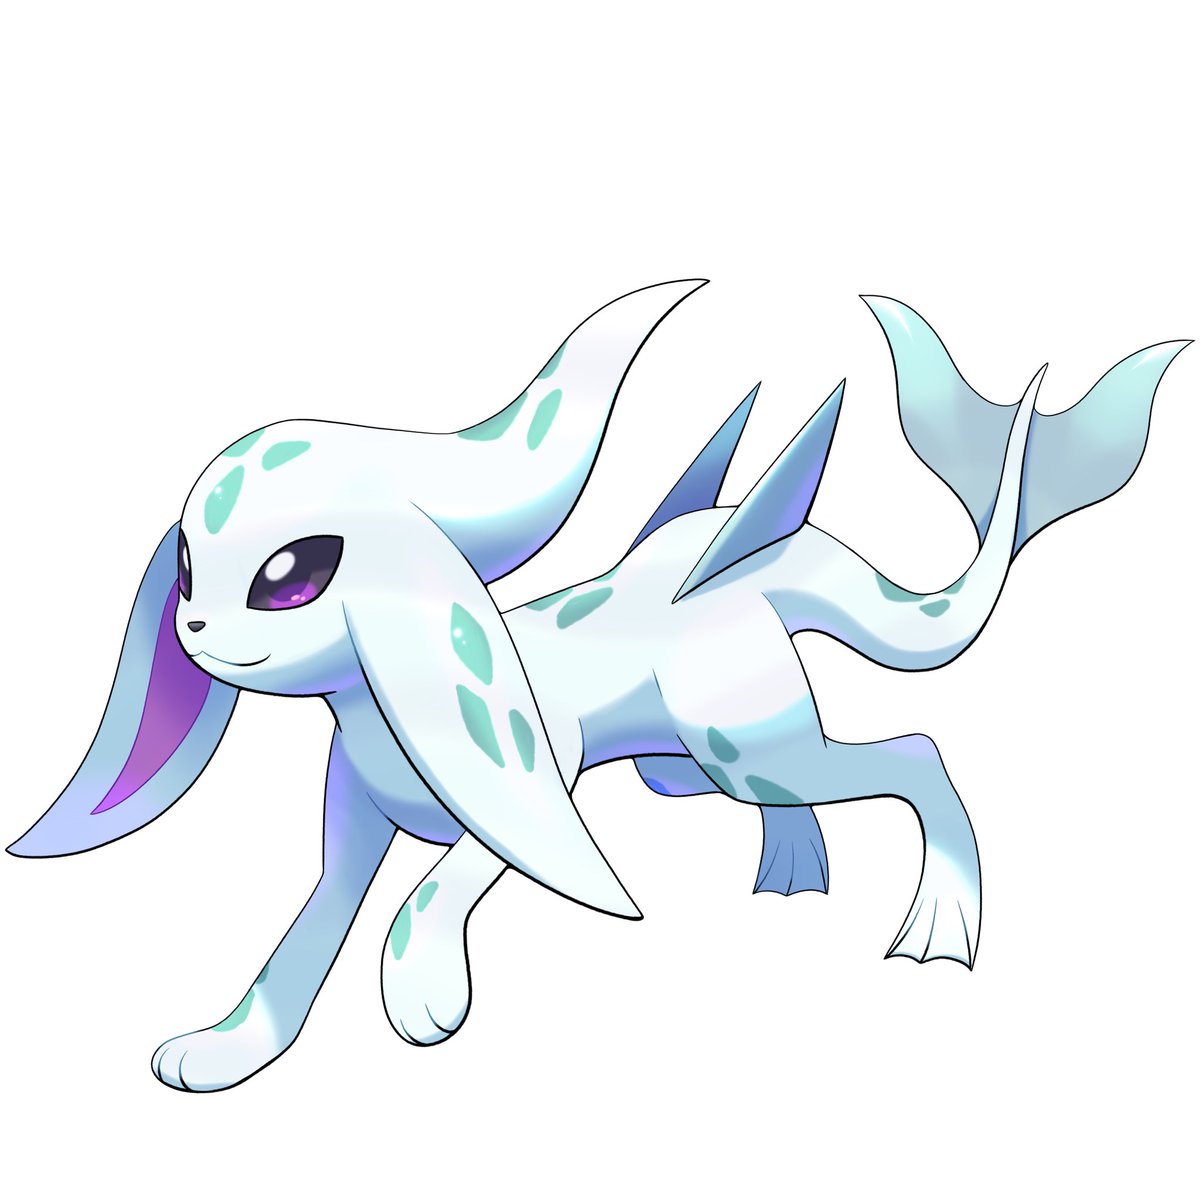 Zoreon - Hyrule’s replacement for Vaporeon